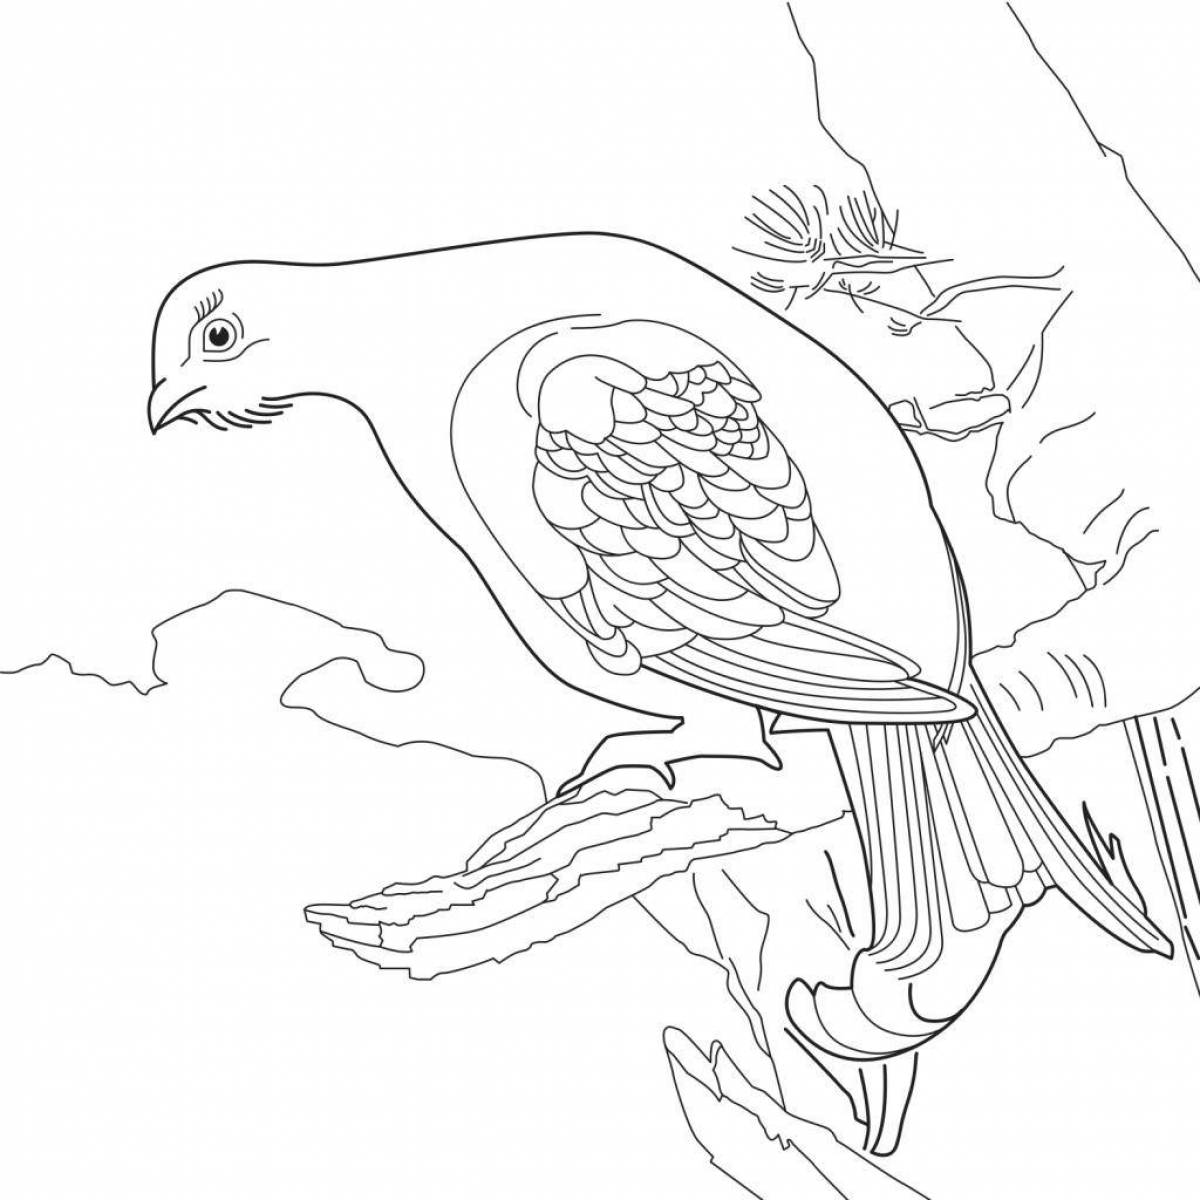 Colorful grouse coloring page for kids